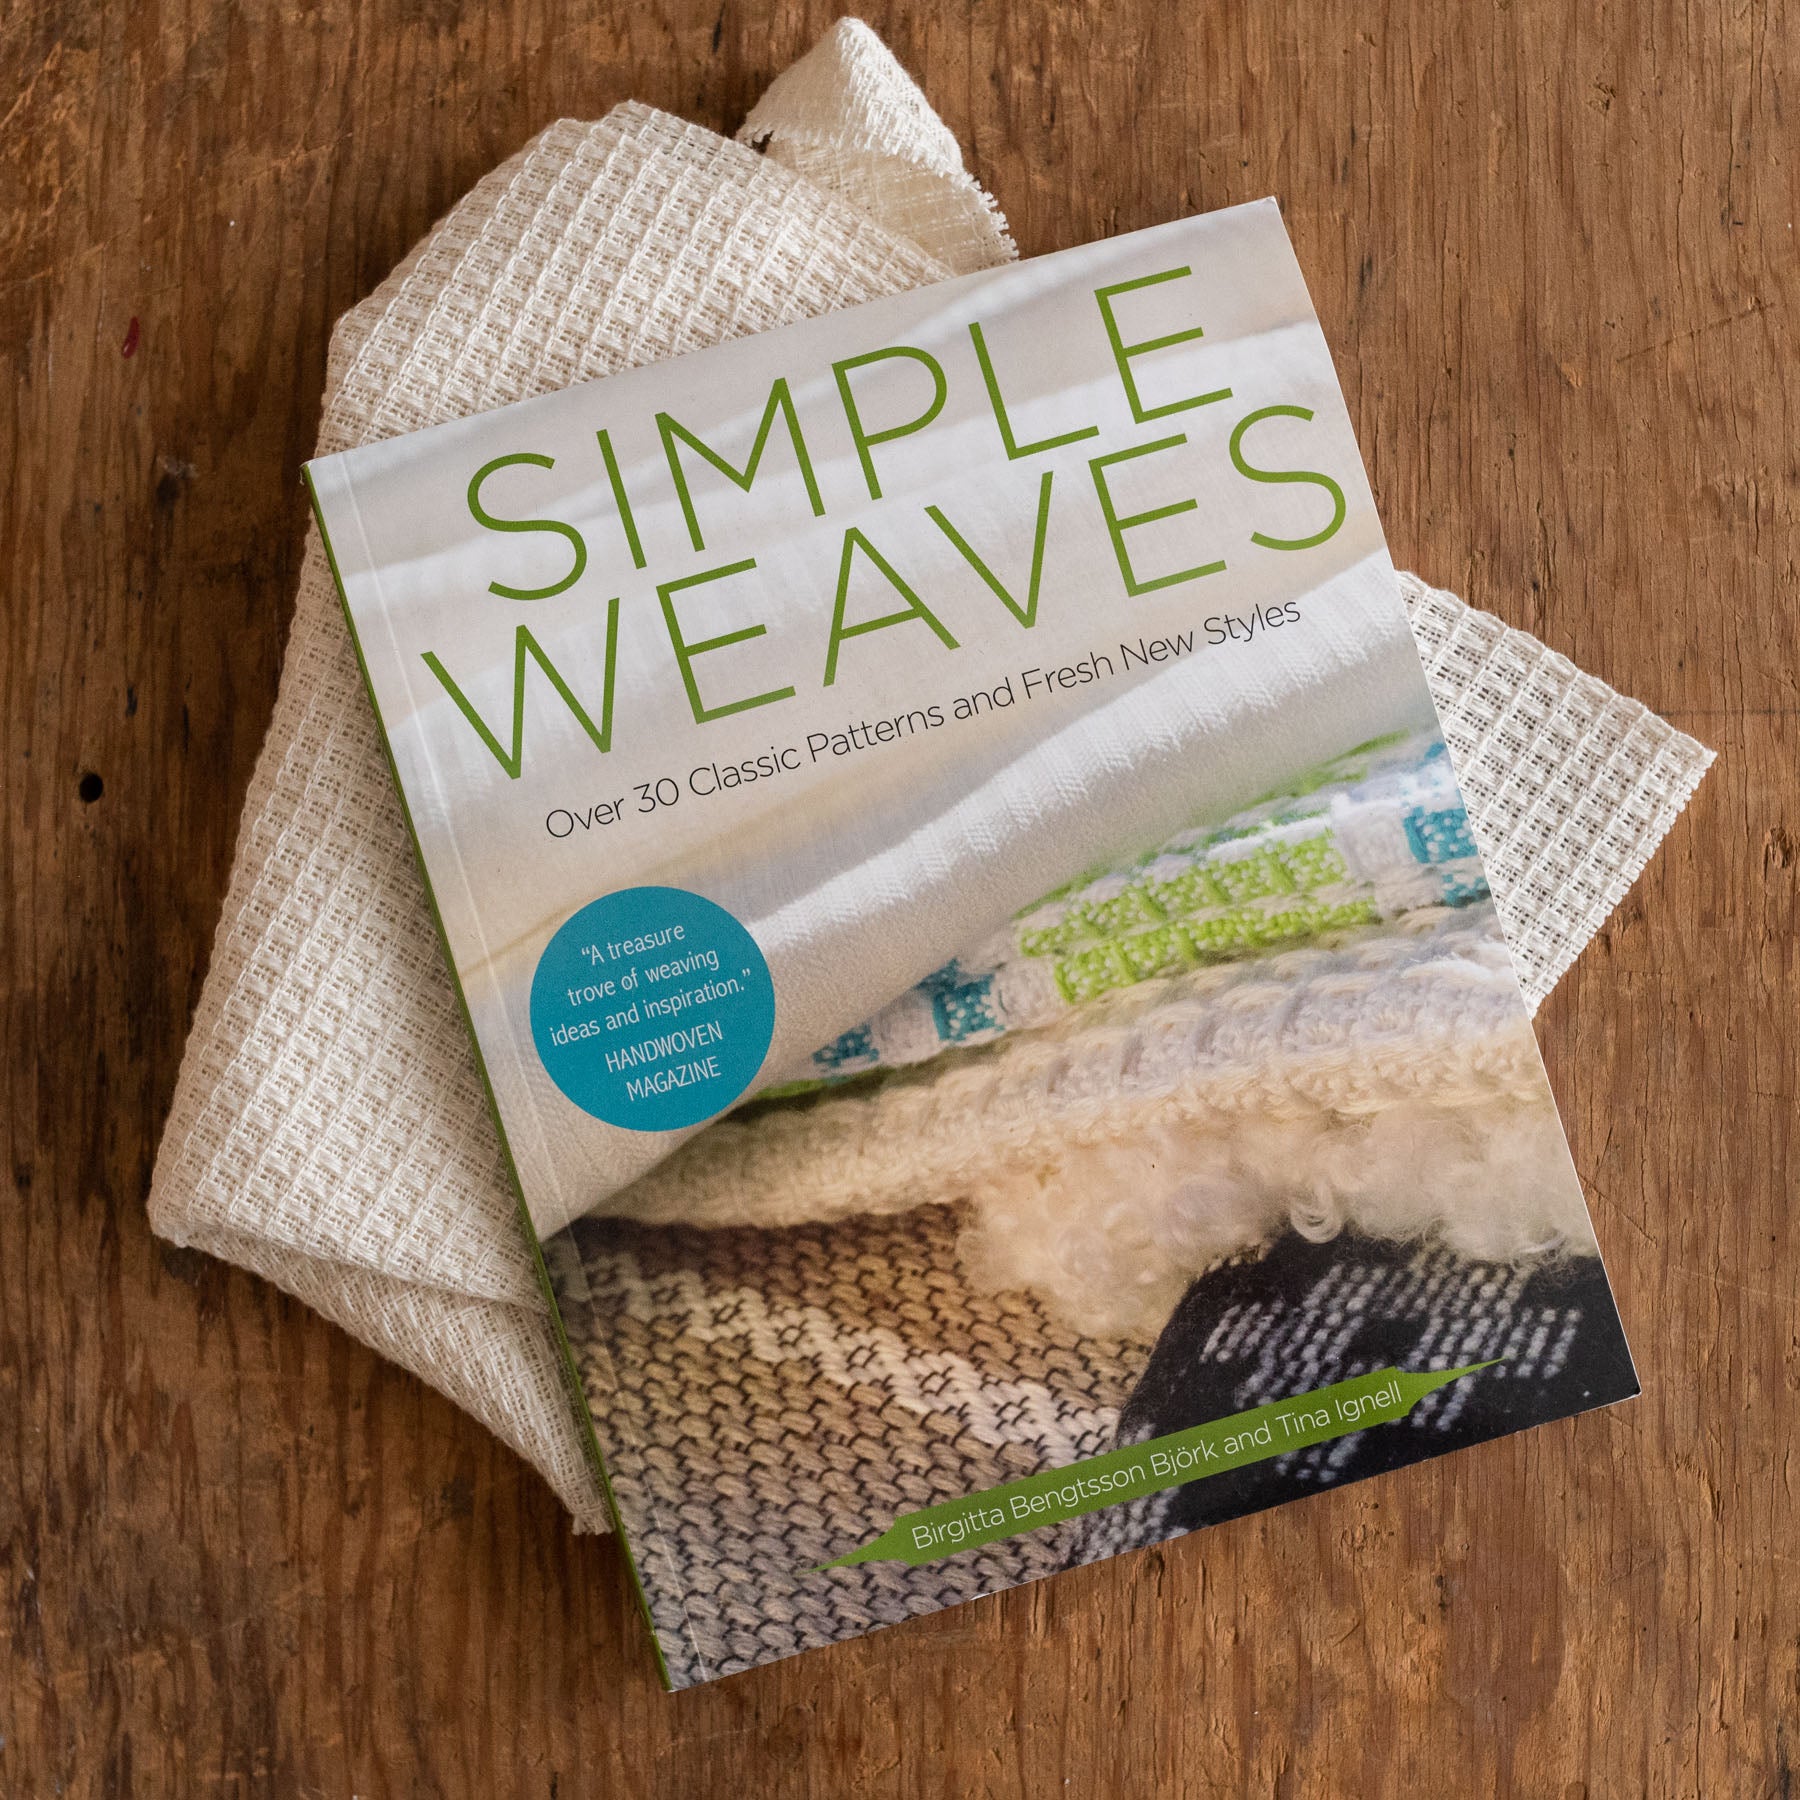 Simple Weaves: Over 30 Classic Patterns and Fresh New Styles by Birgitta Bengtsson Bjork & Tina Ignell